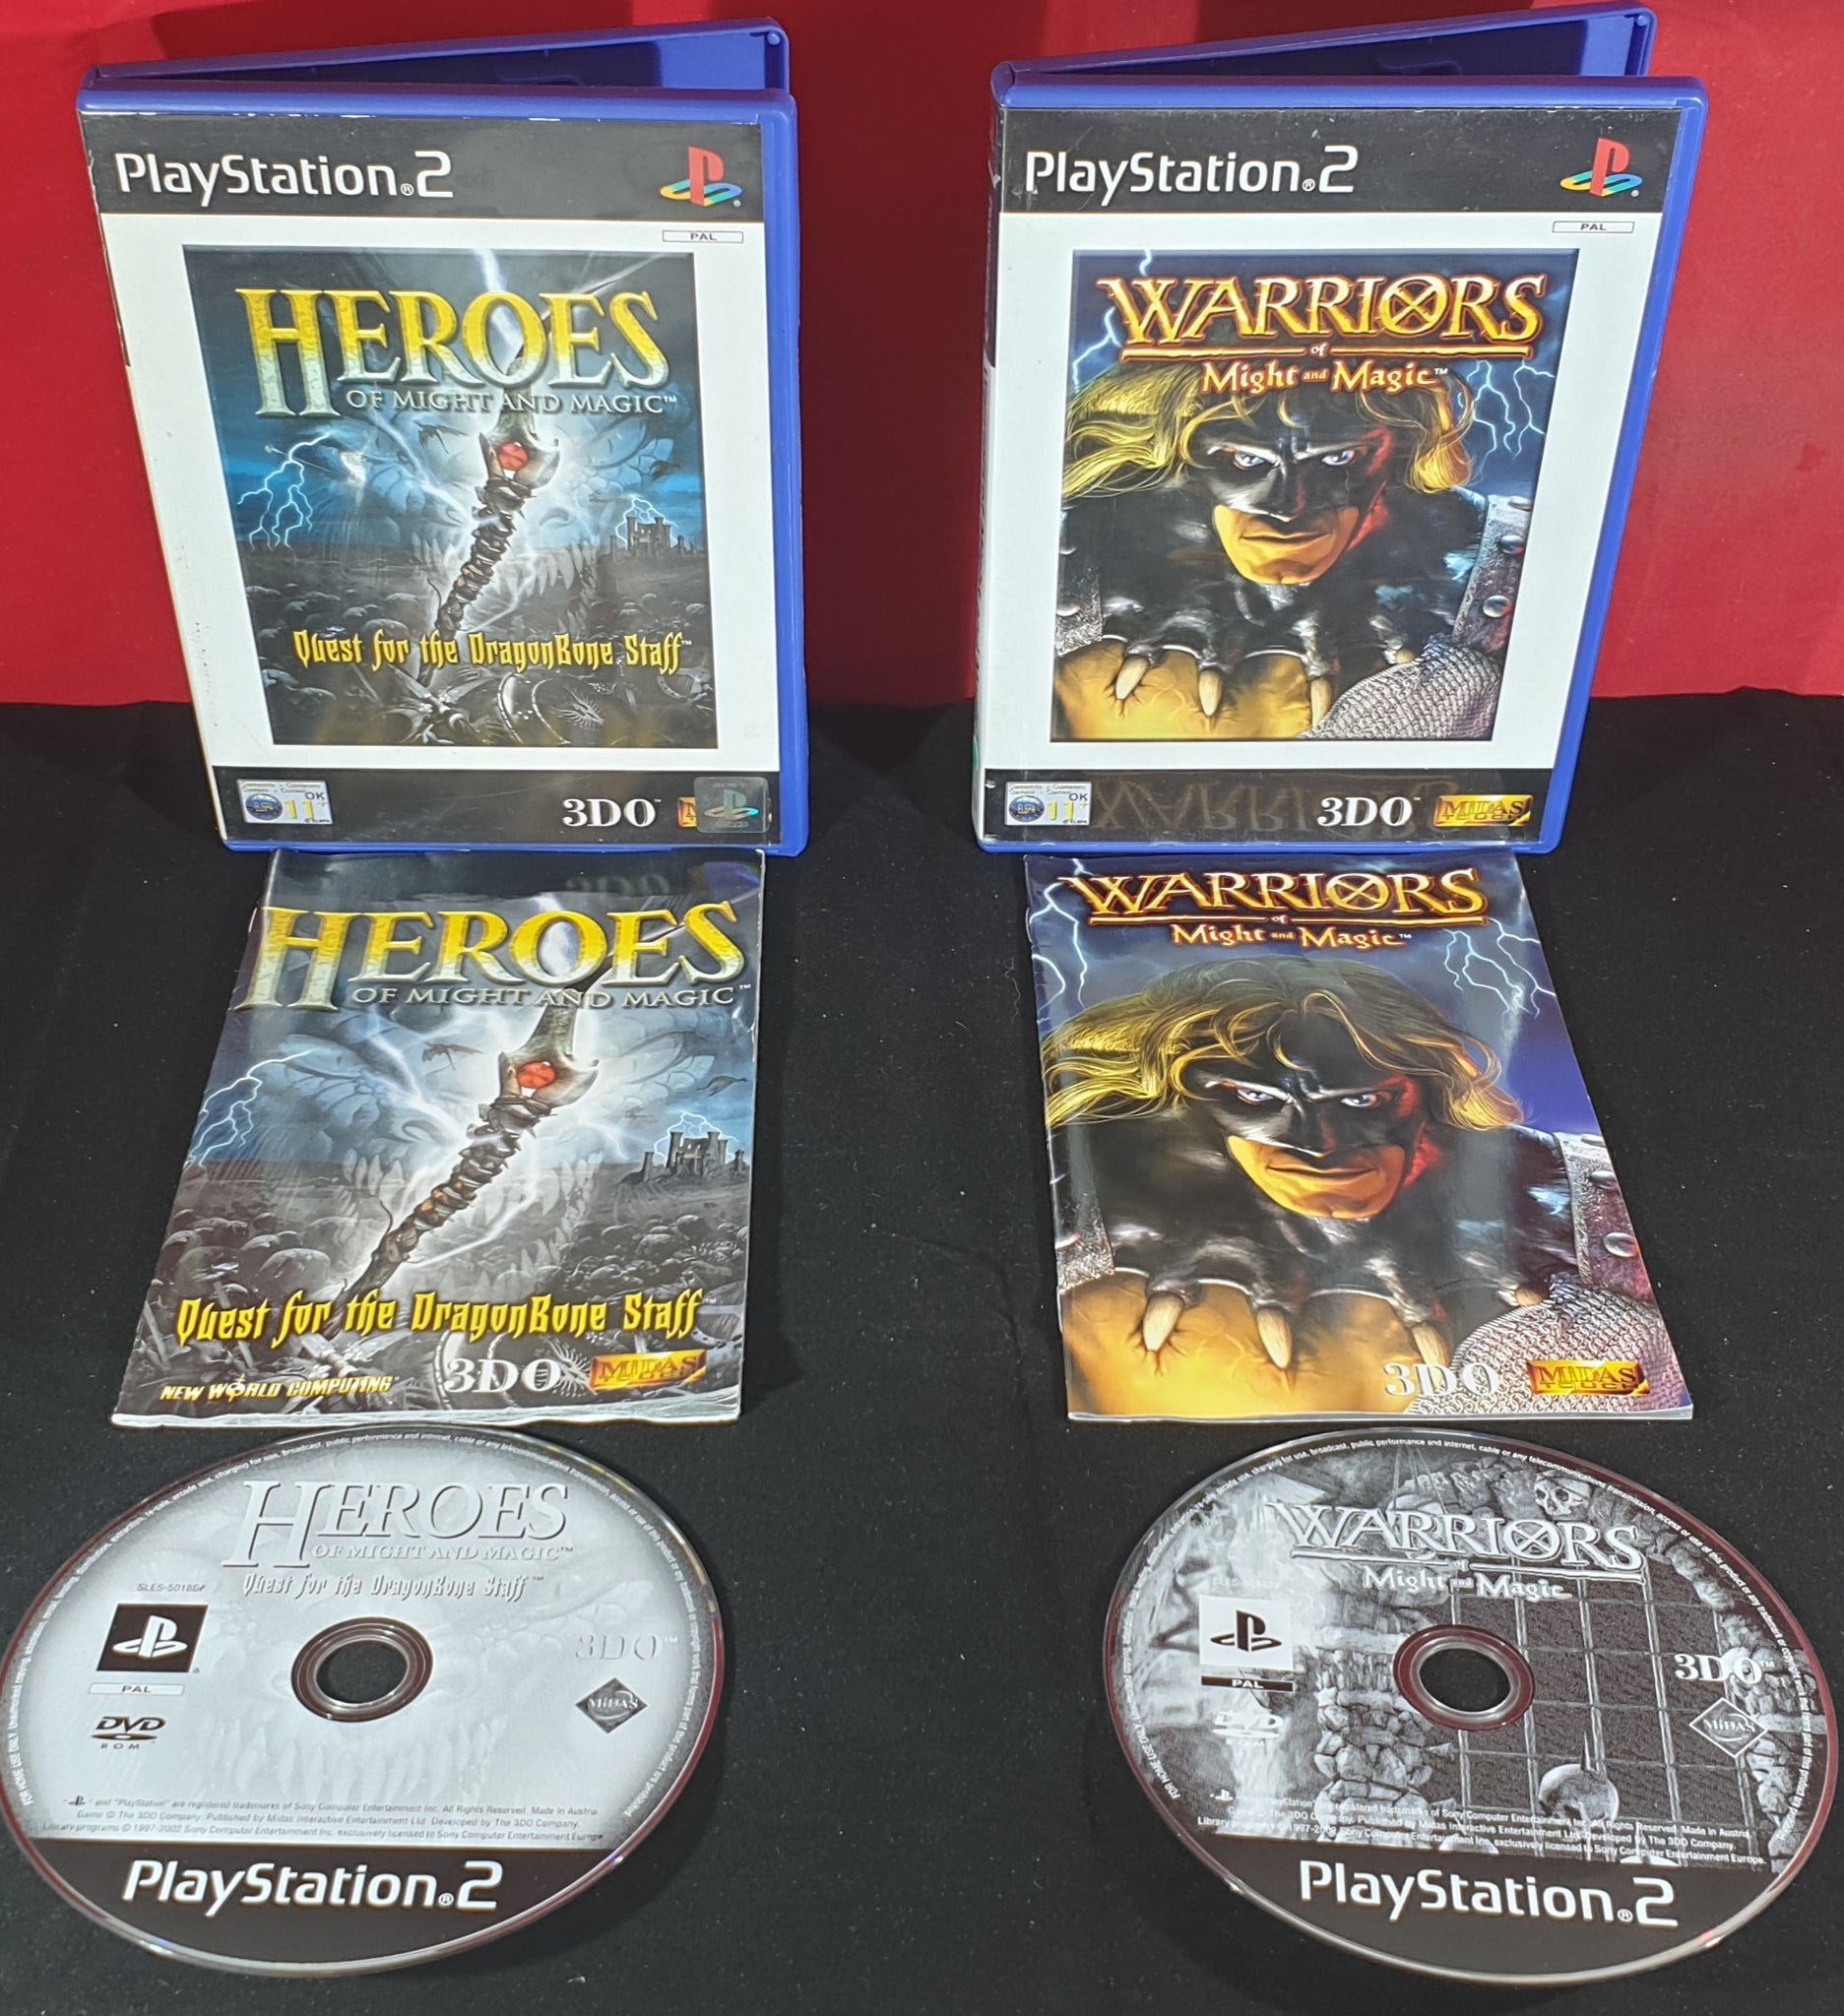 heroes of might and magic bundle